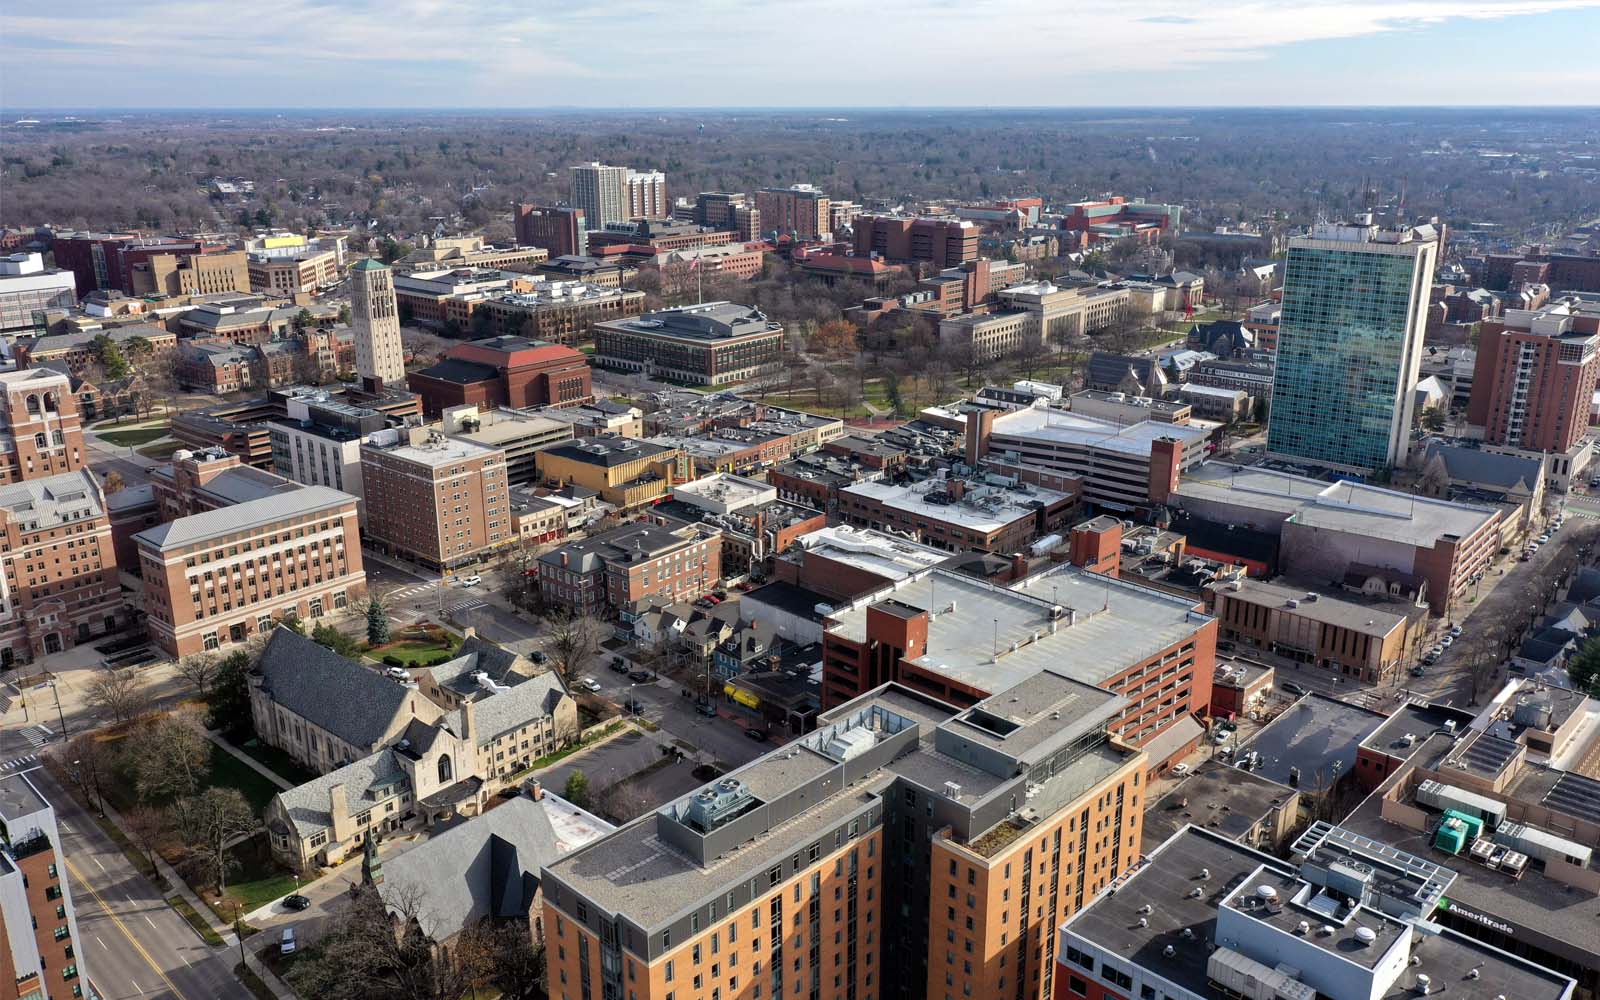 Photo of Ann Arbor, Michigan from above, showing buildings of different sizes, city streets, and the horizon